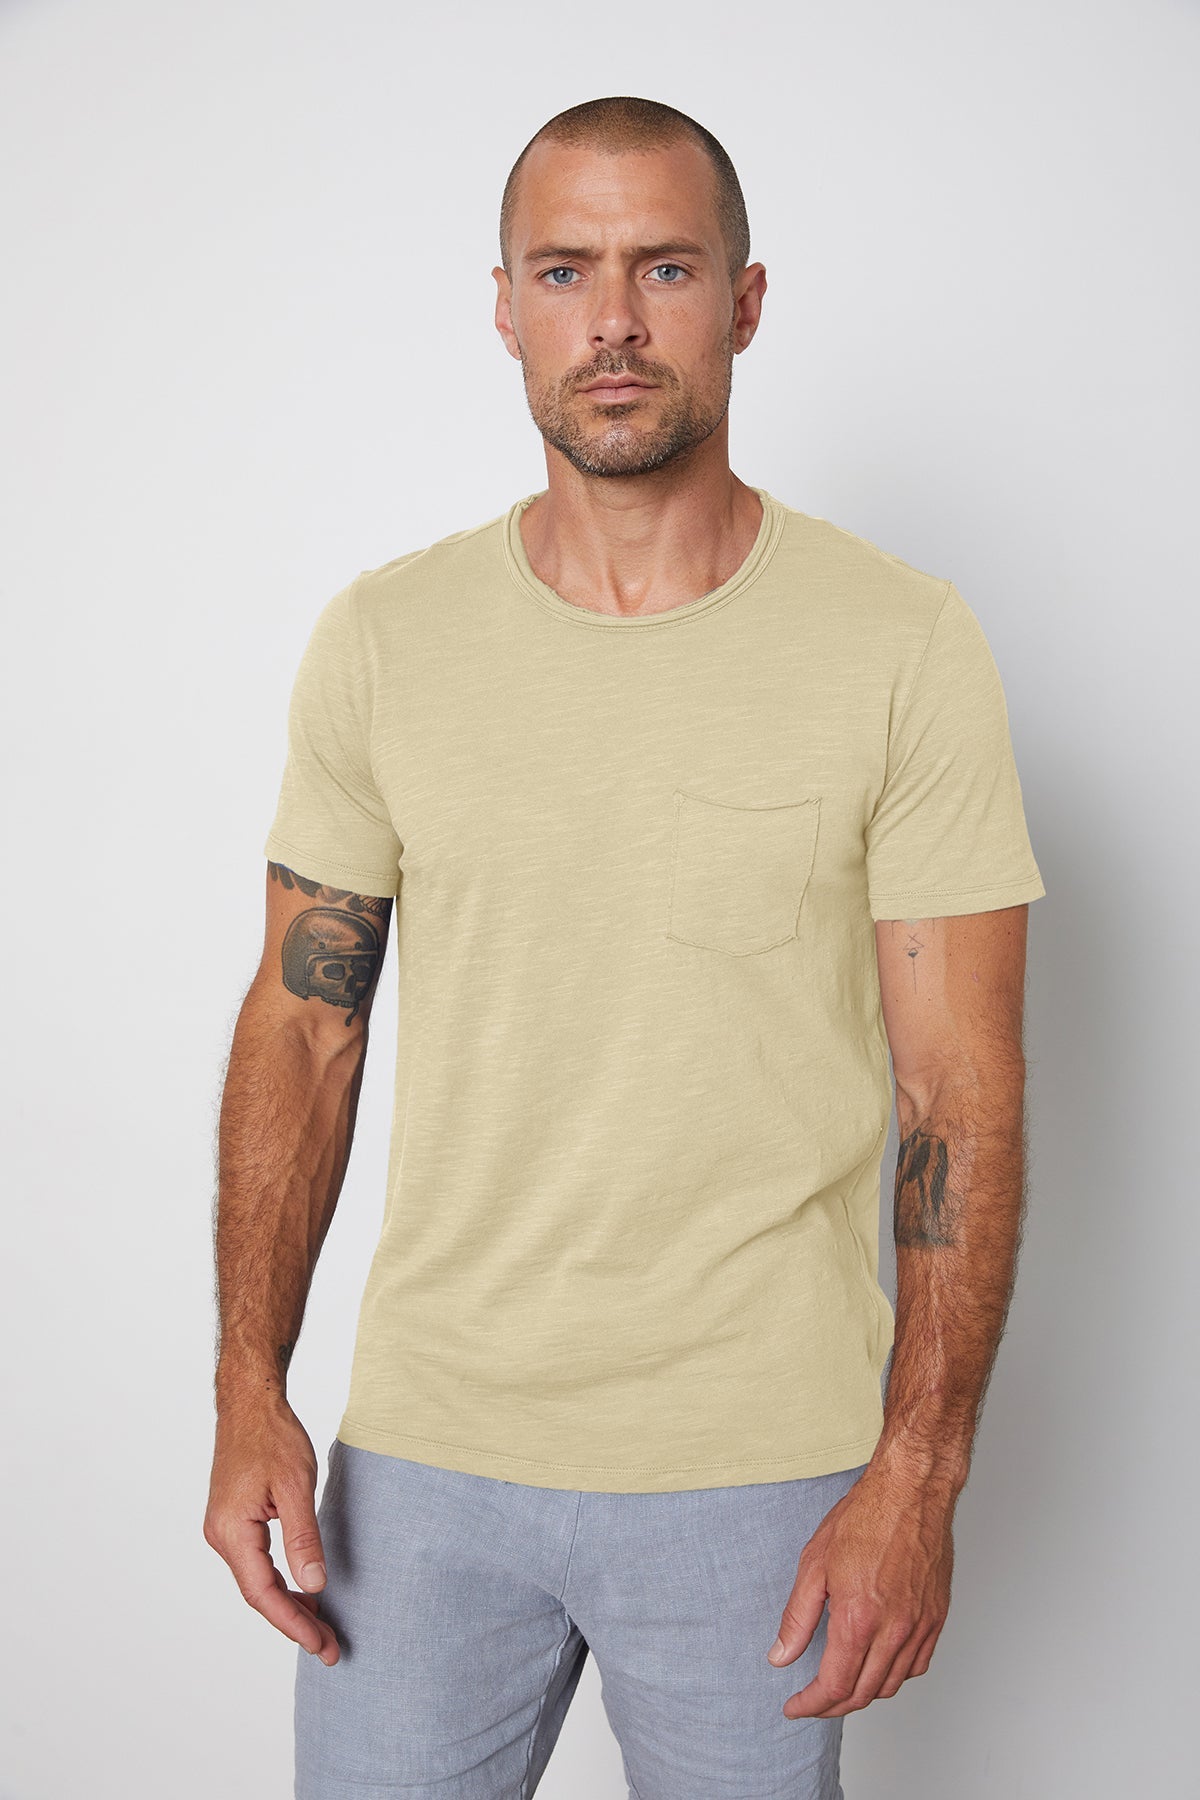 Chad Raw Edge Cotton Slub Pocket Tee in Olivine with Jonathan shorts in chambray front-25328431235265